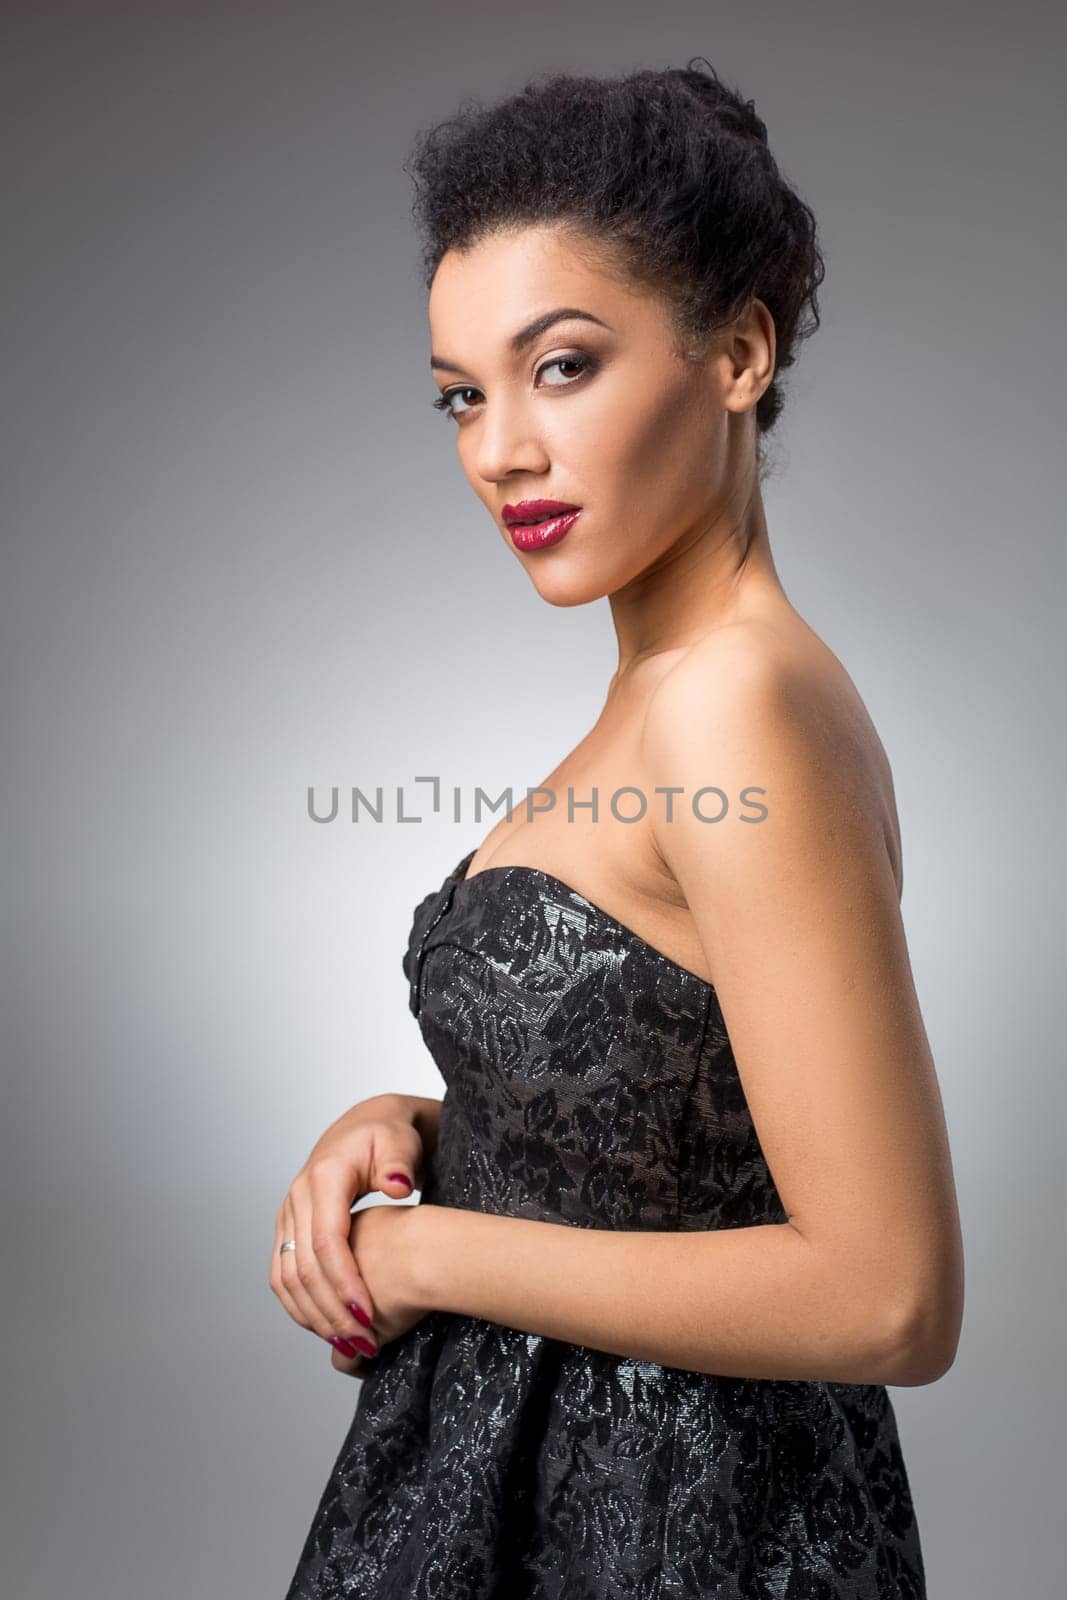 Portrait of beautiful brunette girl in the studio on a gray background in a black dress. She looks into the camera